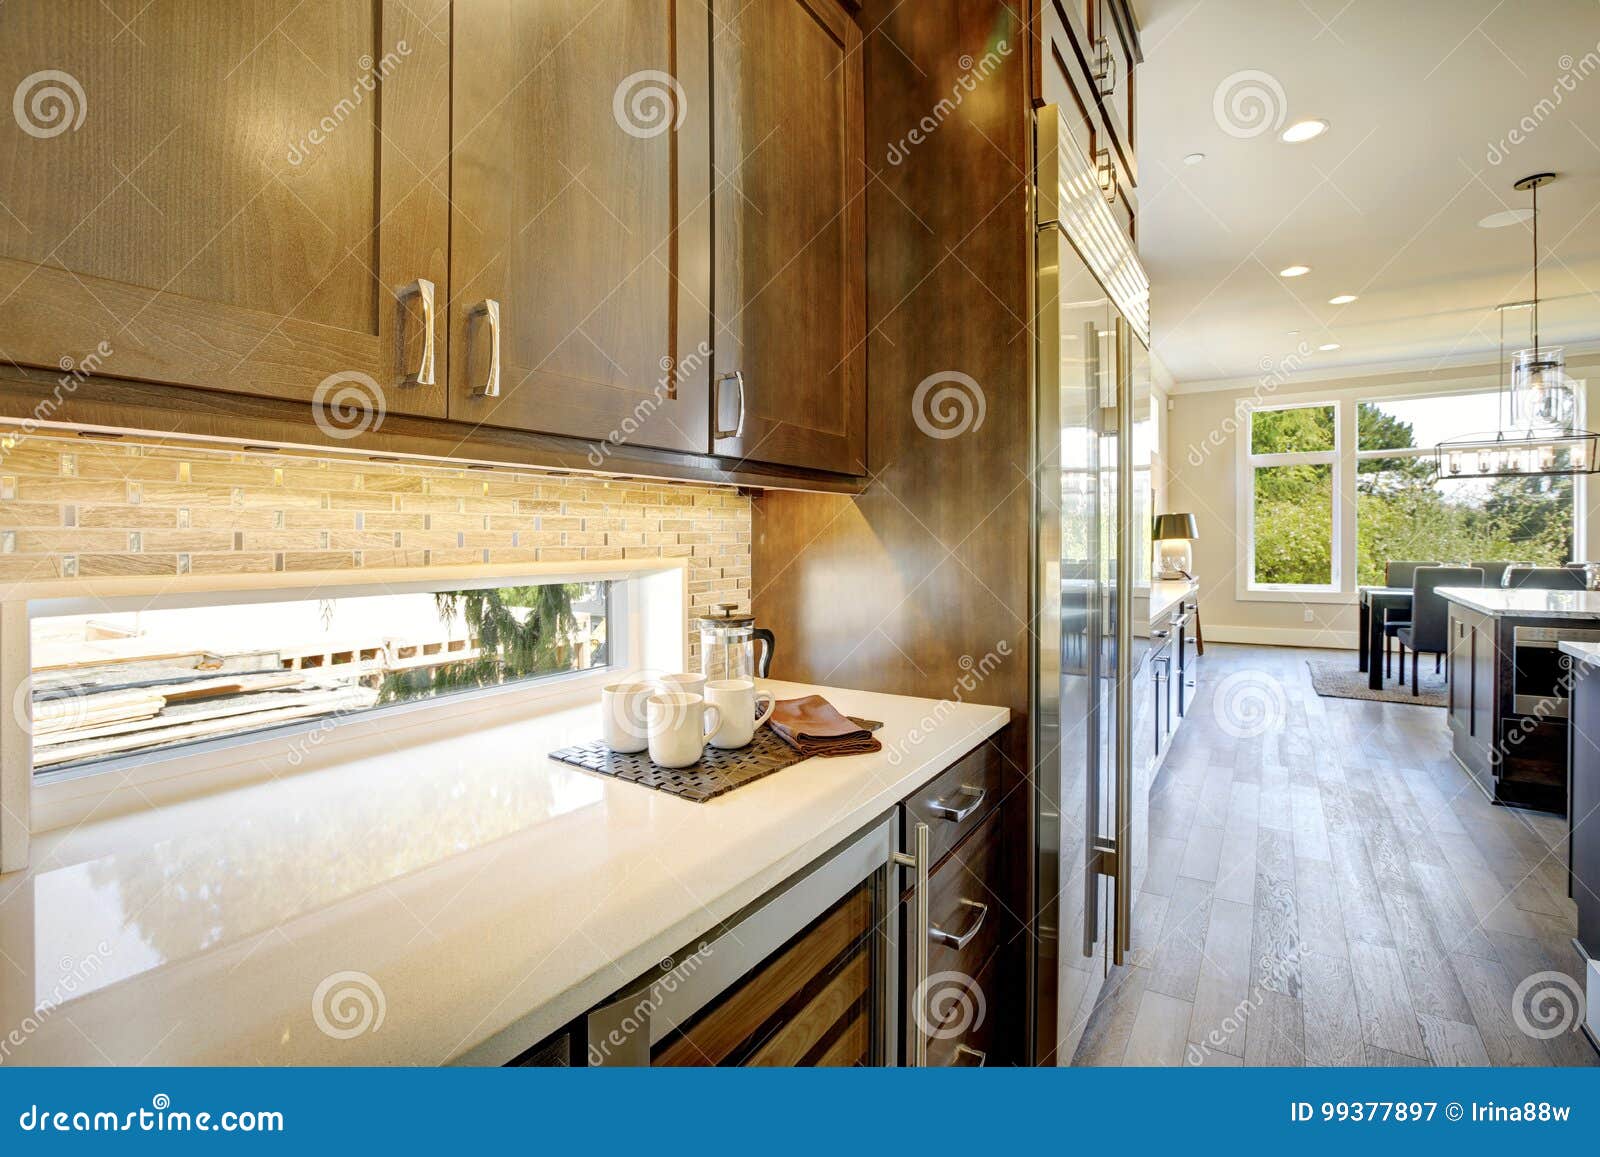 Luxury Kitchen With A Glass Door Wine Cooler Stock Image Image